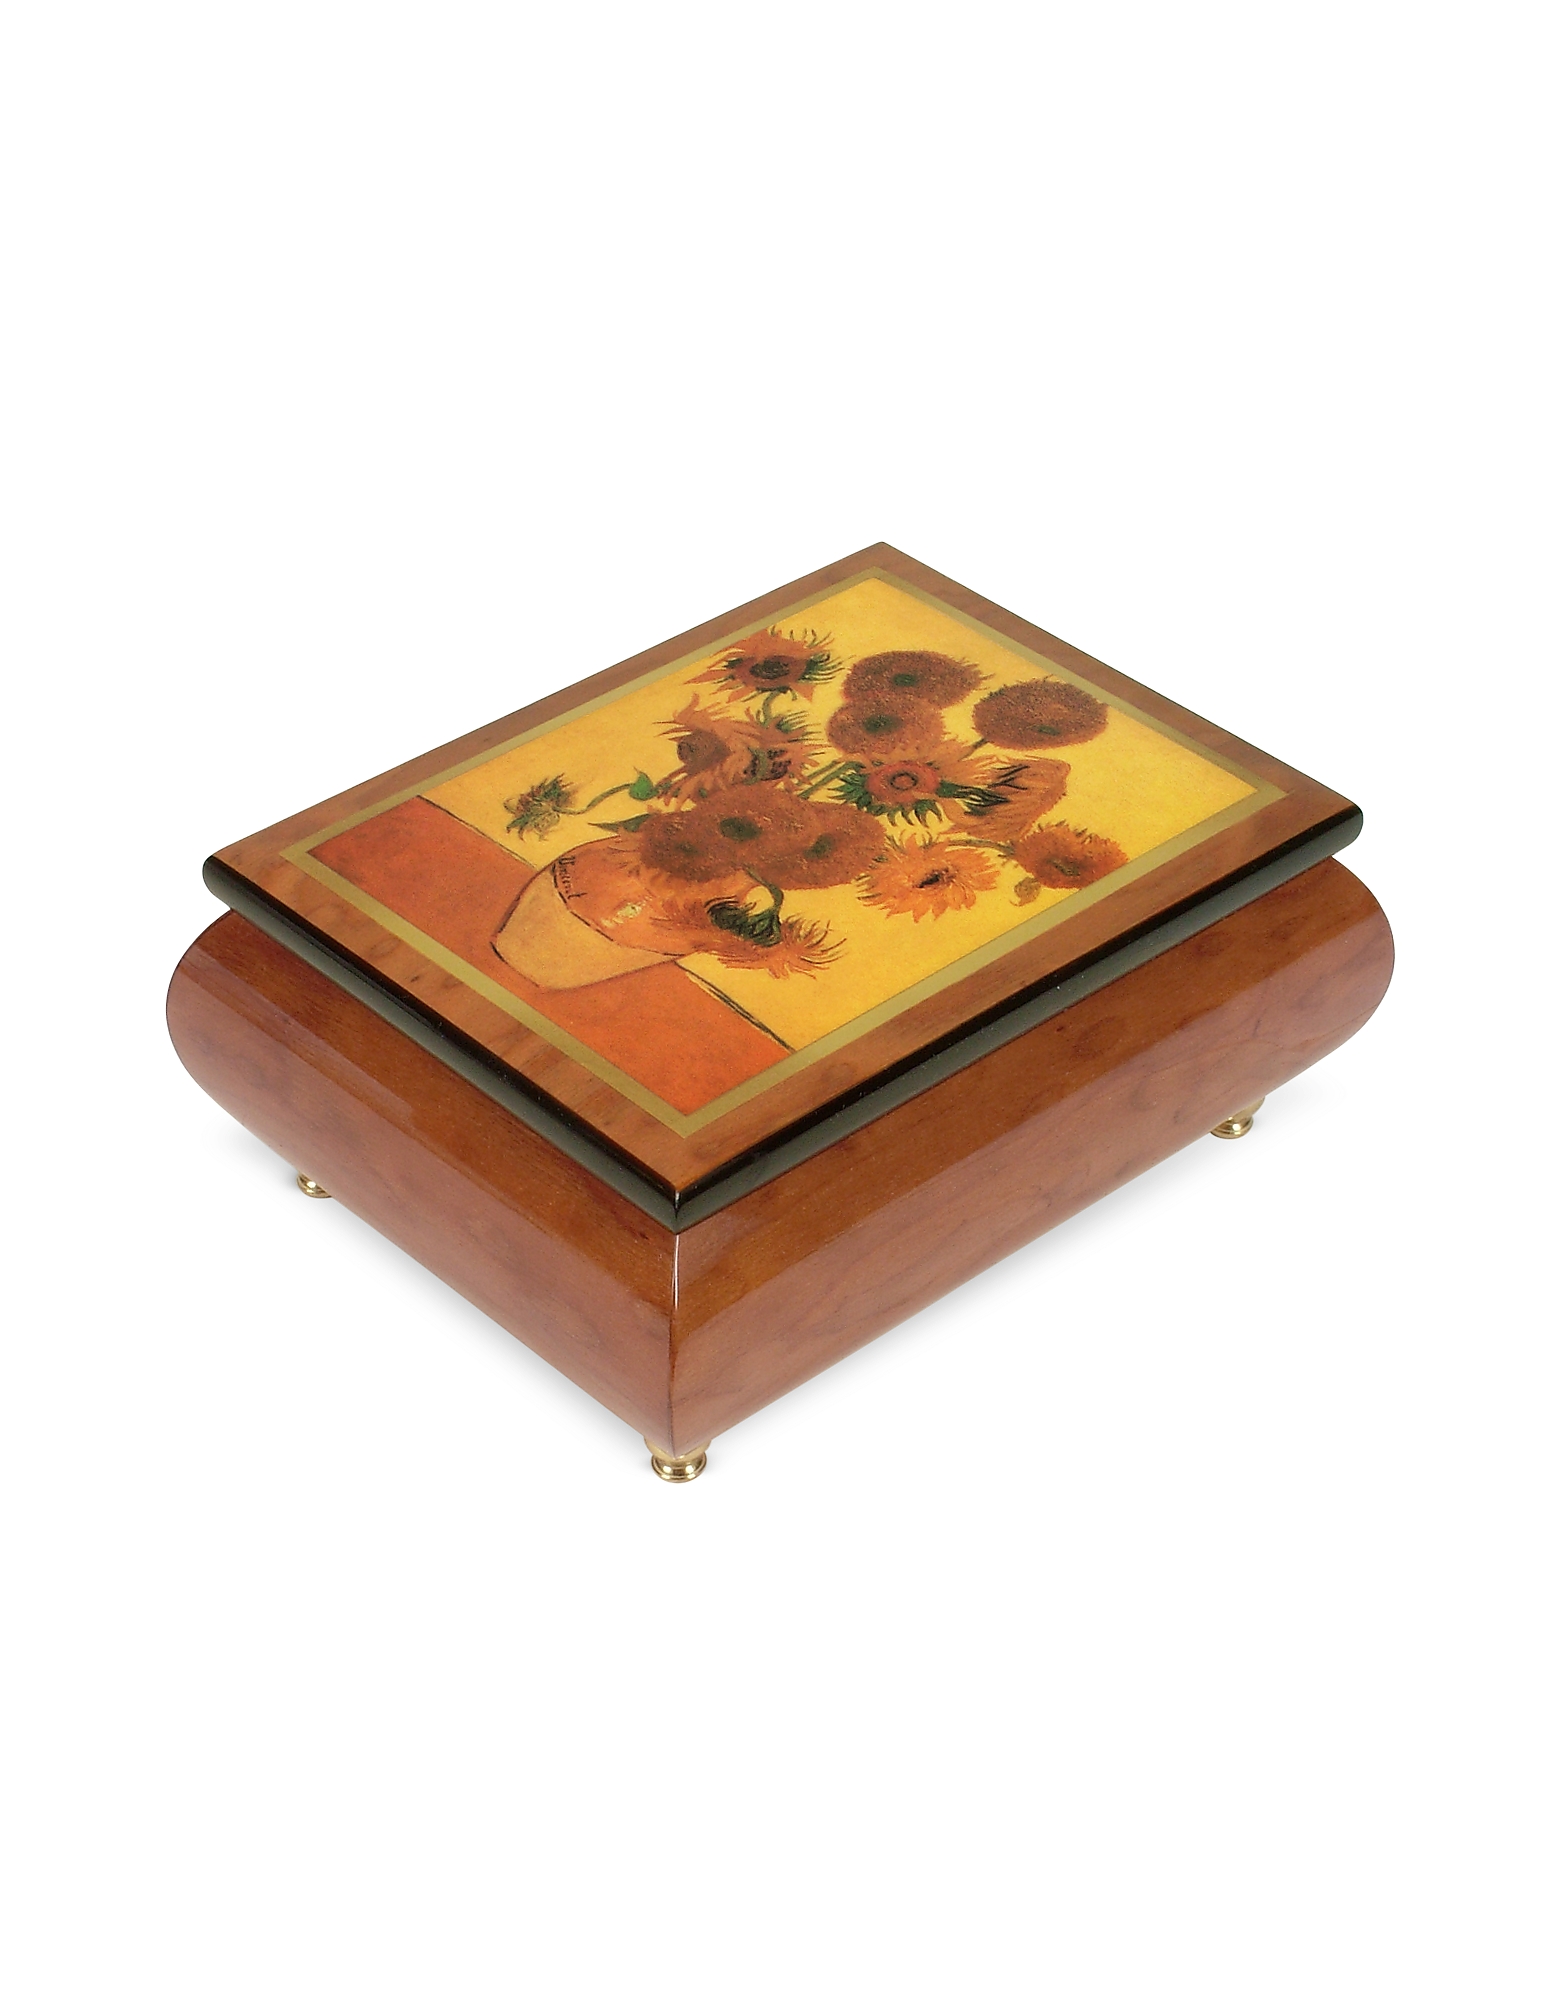 

It's a Small World - "Sunflowers" Musical Jewelry Box, Brown